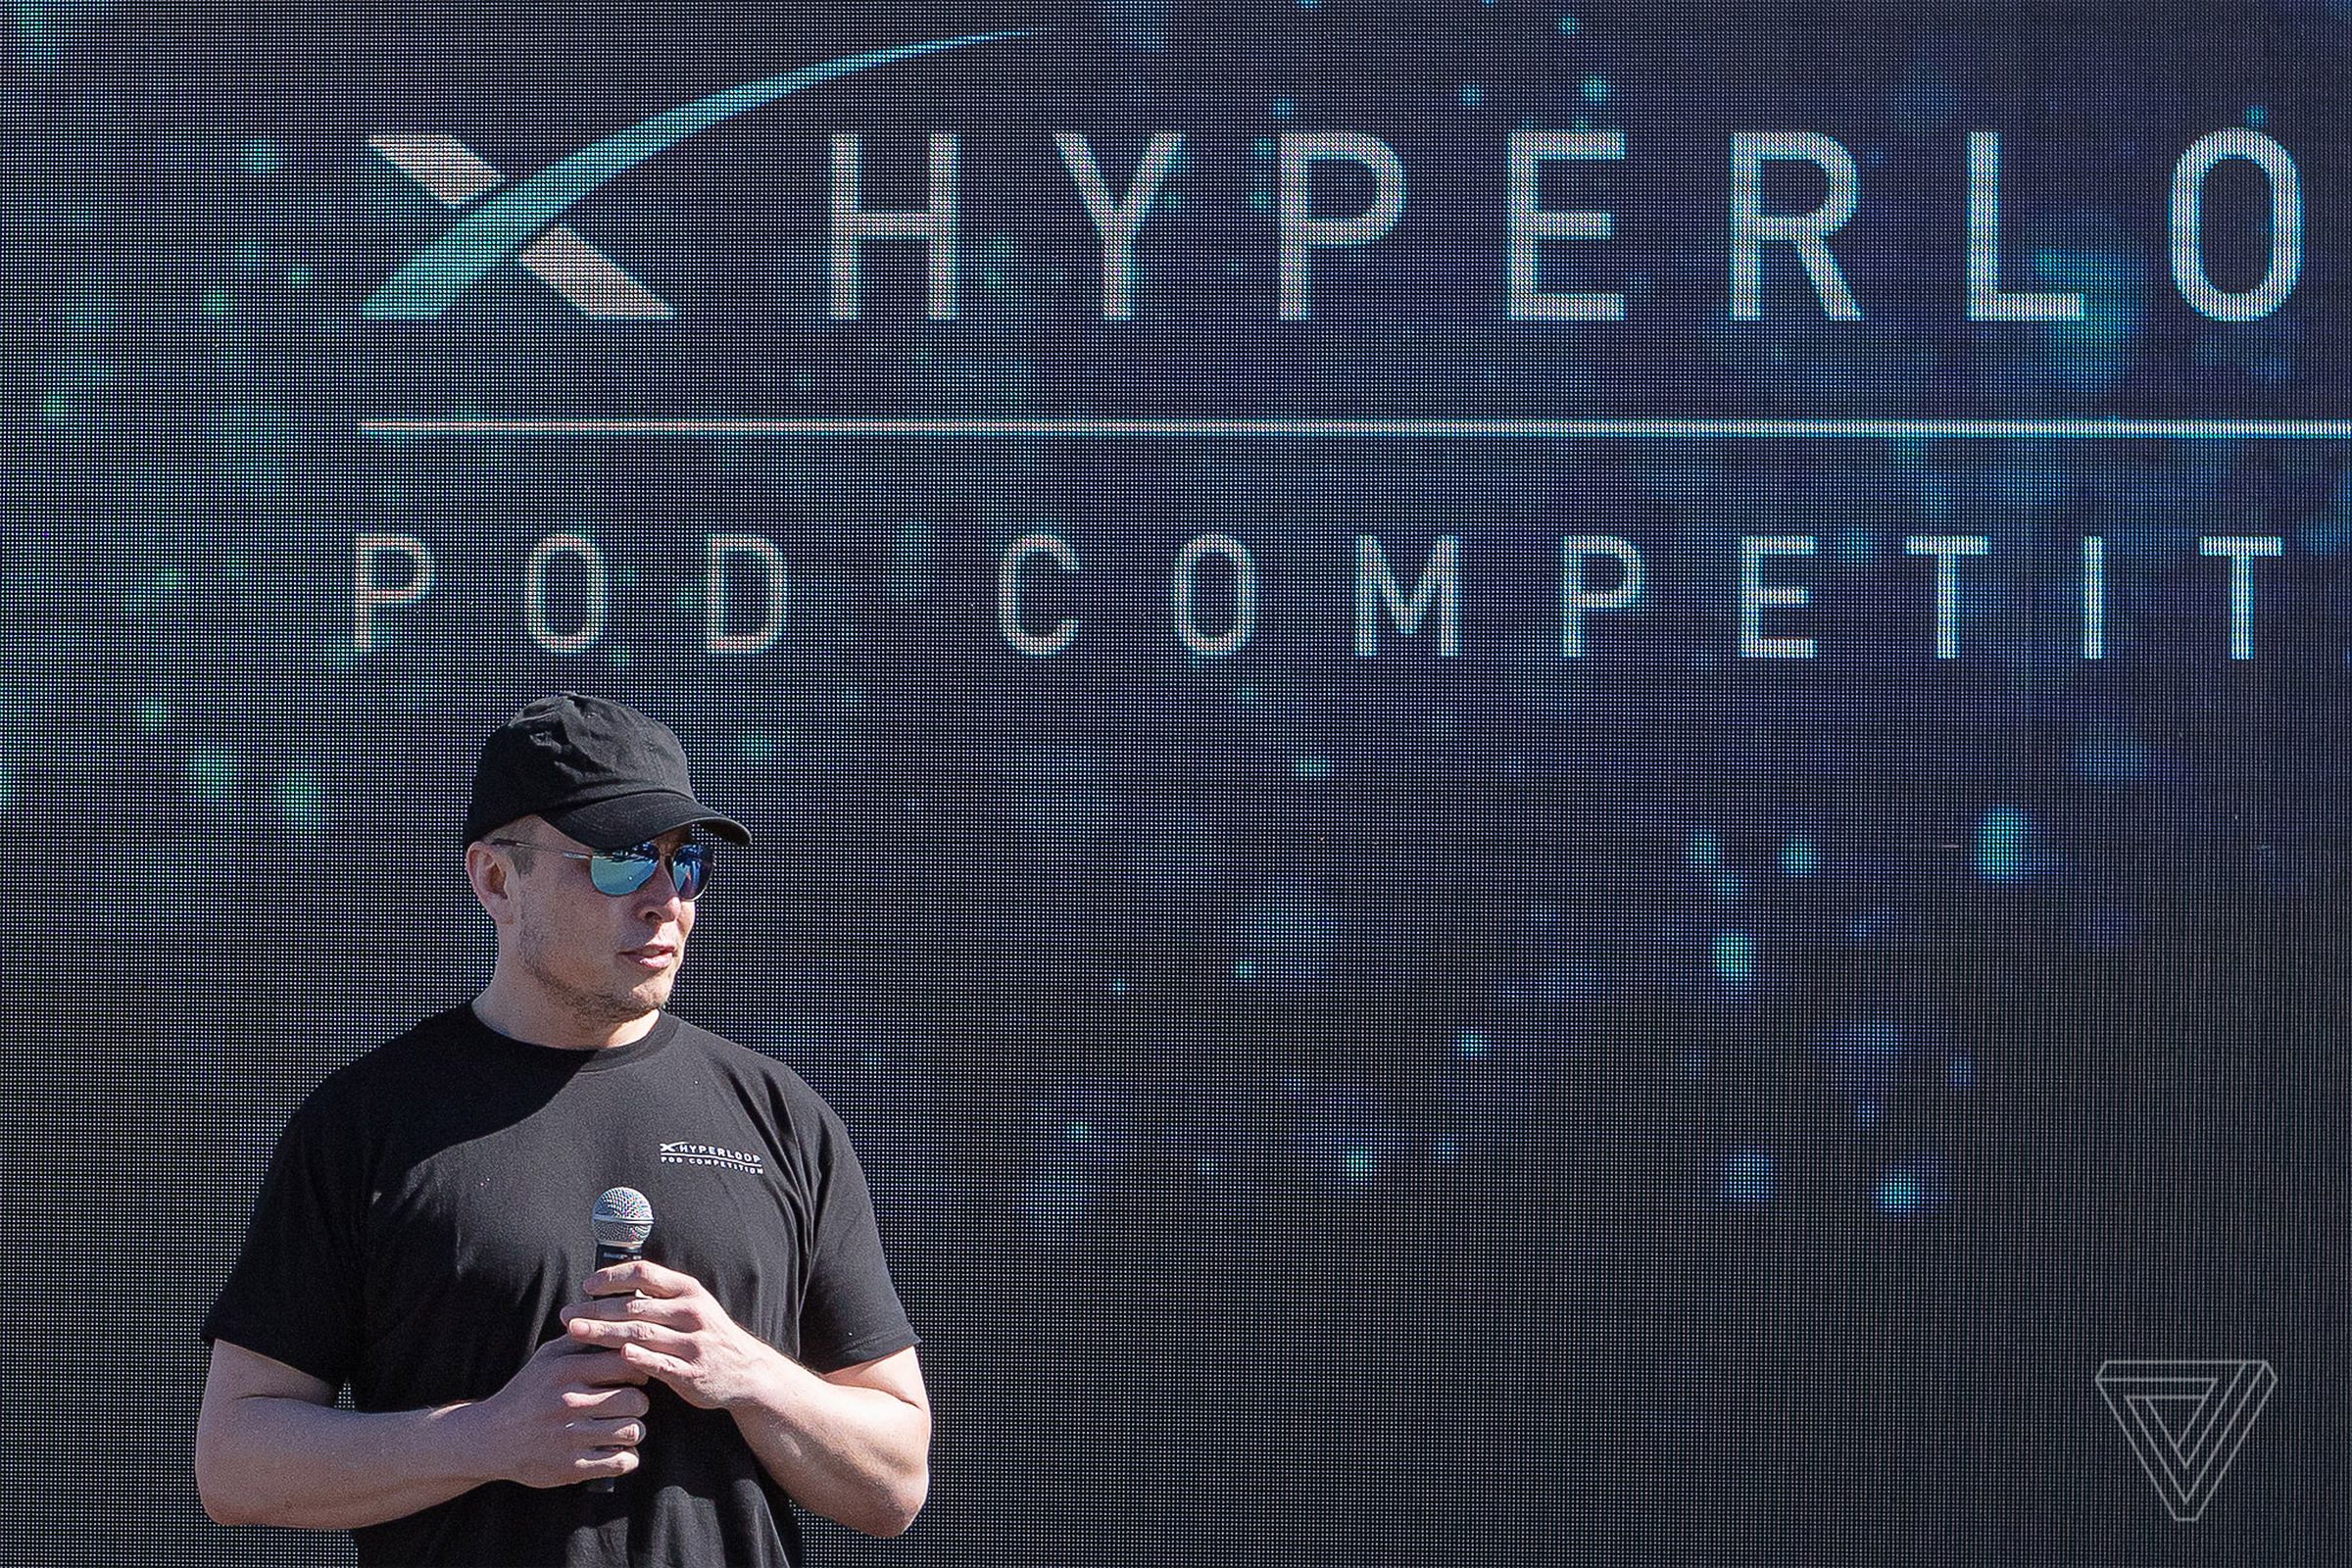 Elon Musk at the 2019 Hyperloop Pod Competition.